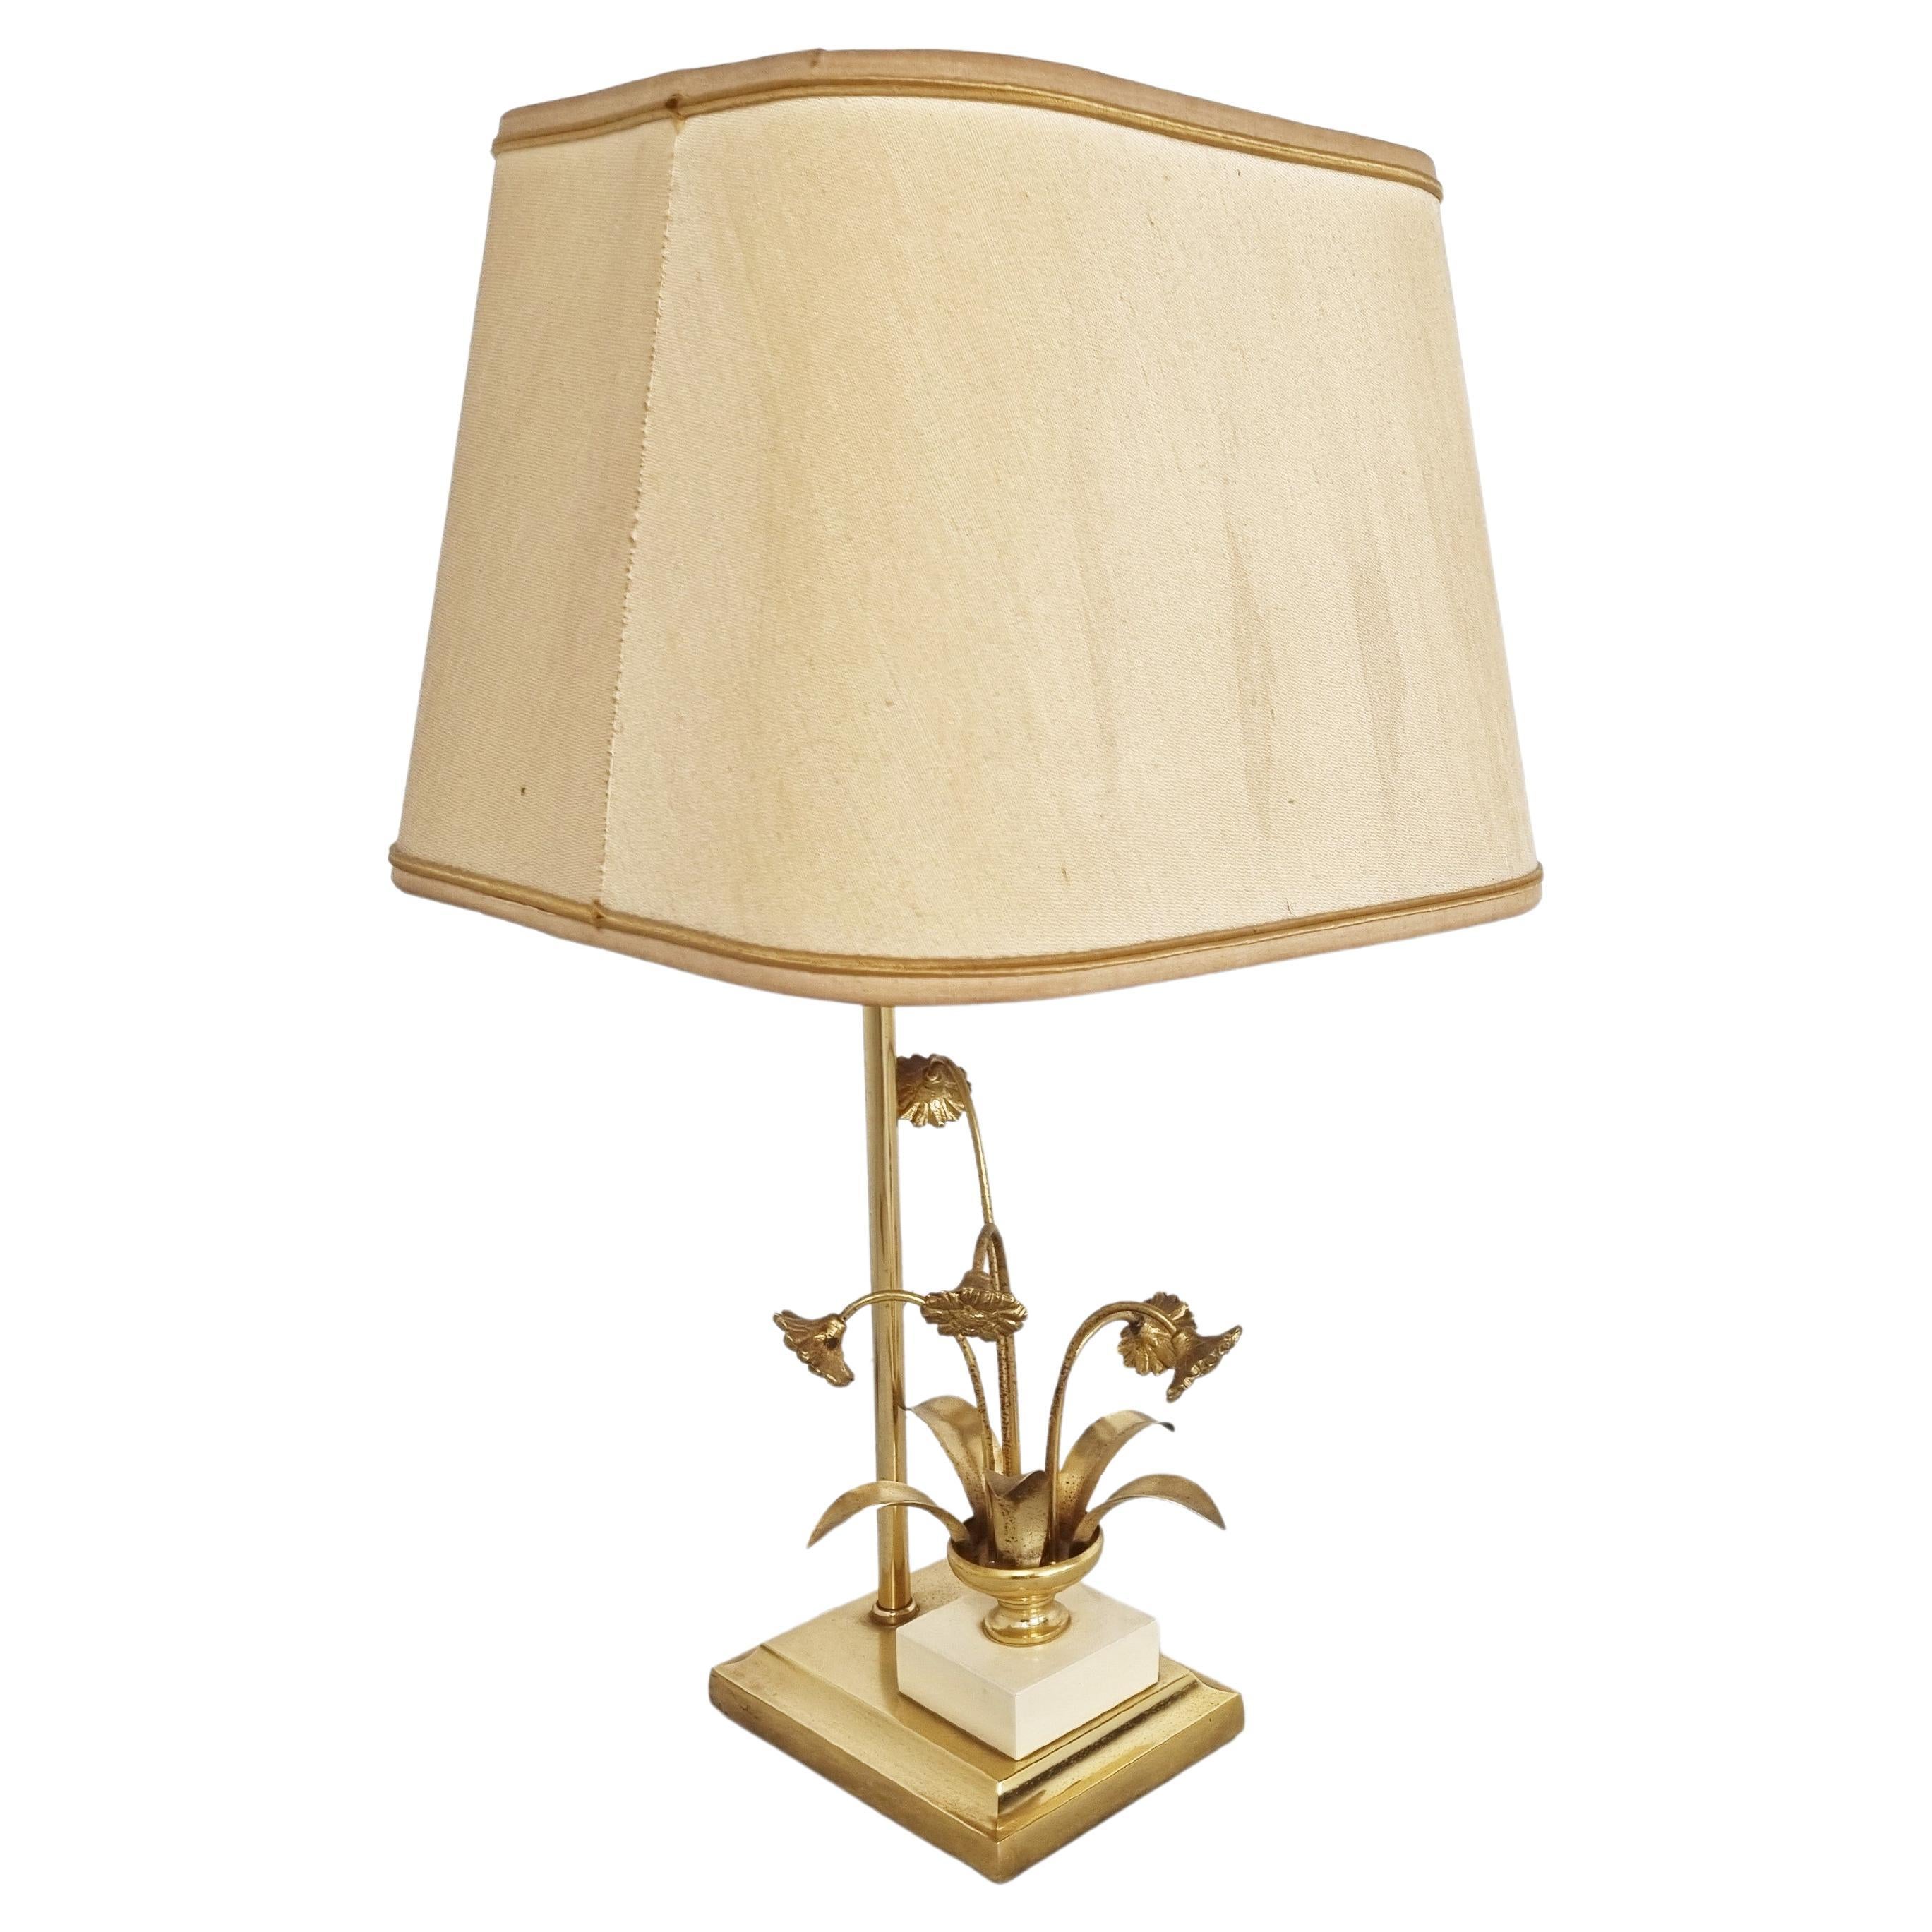 Vintage Brass Flower Table Lamp by Massive, 1970s